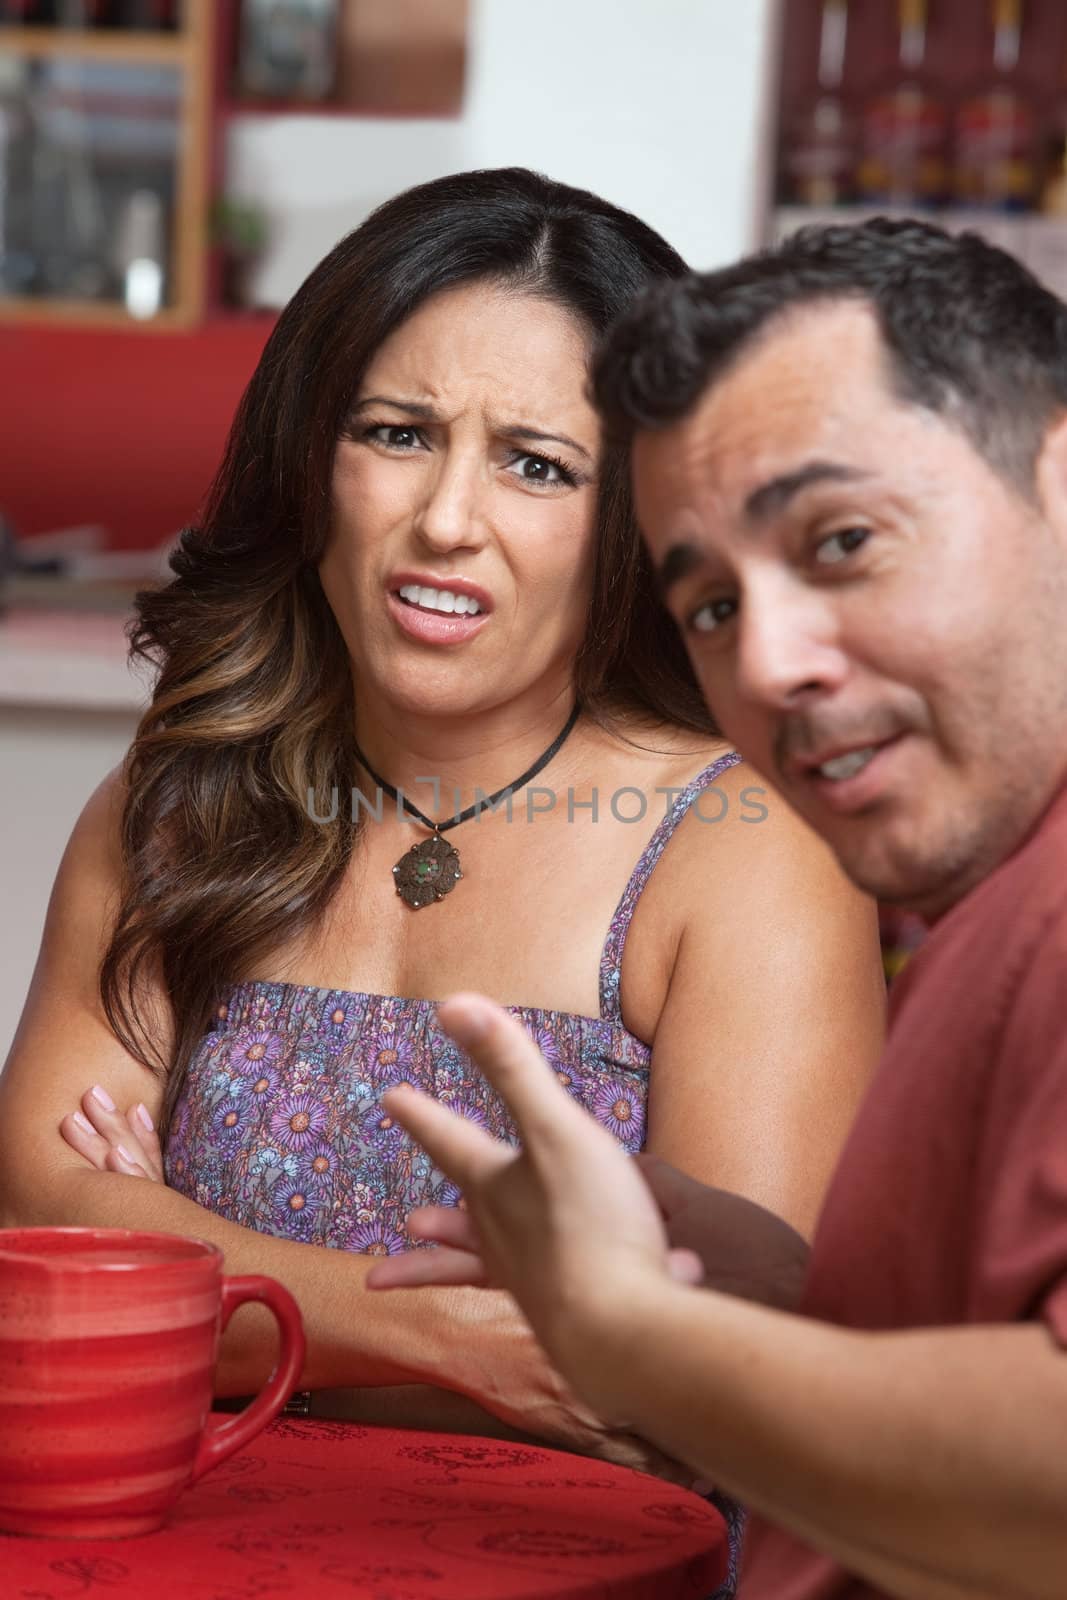 Disgusted Woman with Man in Cafe by Creatista